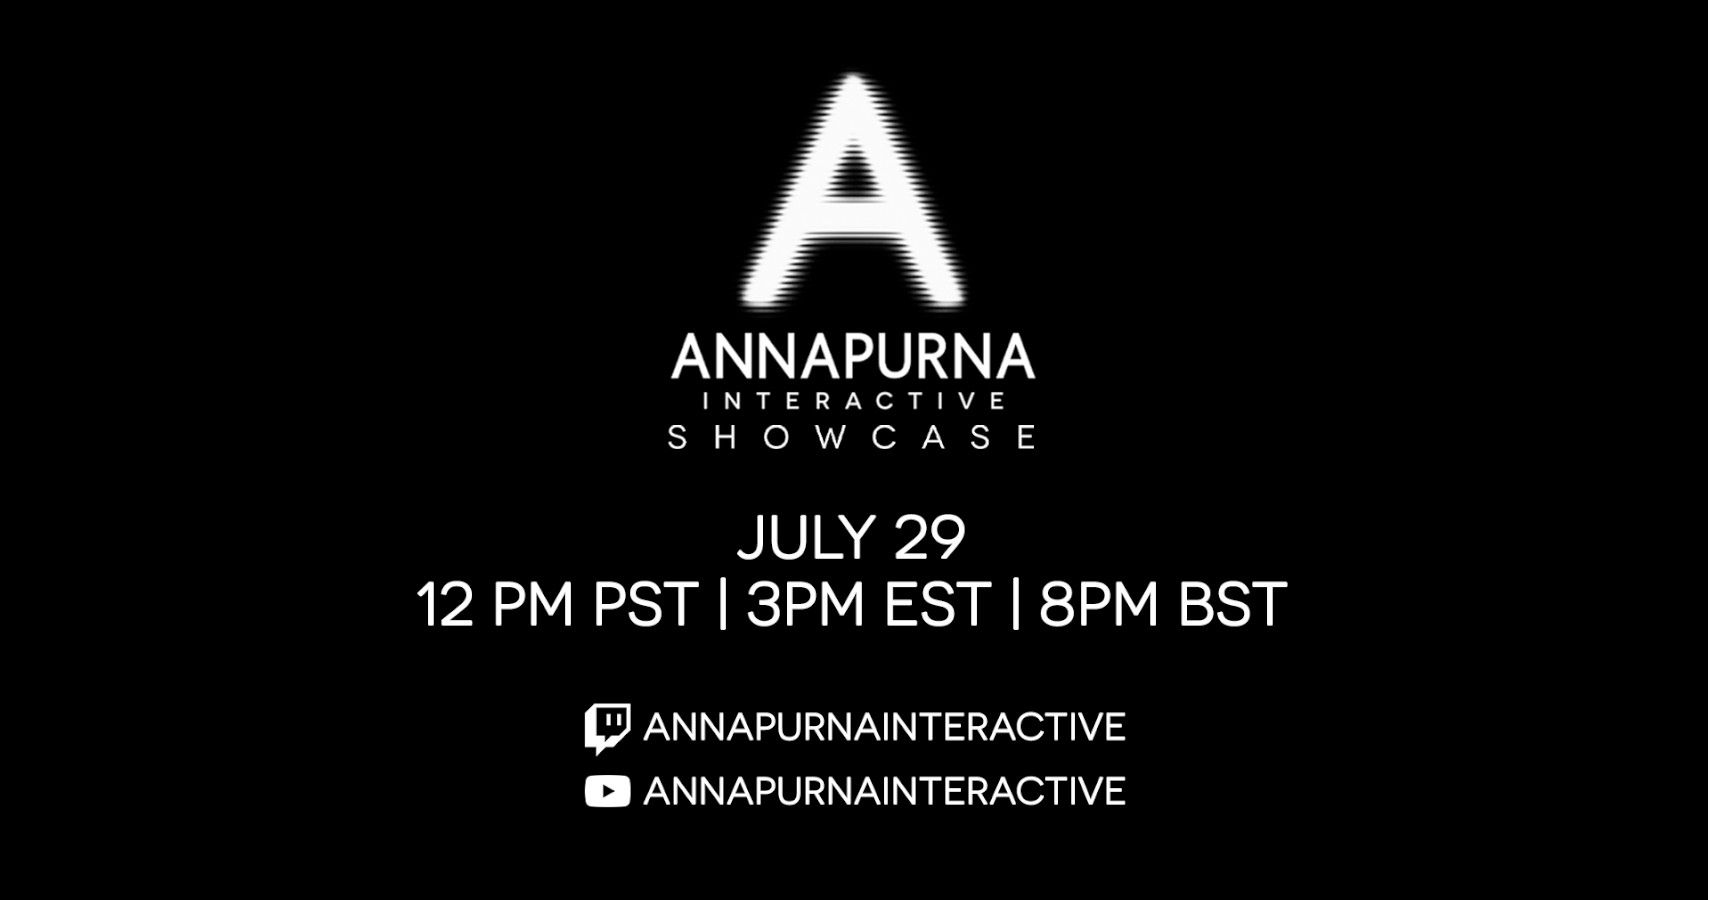 annapurna interactive logo with links to the company's youtube and twitch channels. tune in july 29, 12pm Pst, 3pm est, 8pm bst